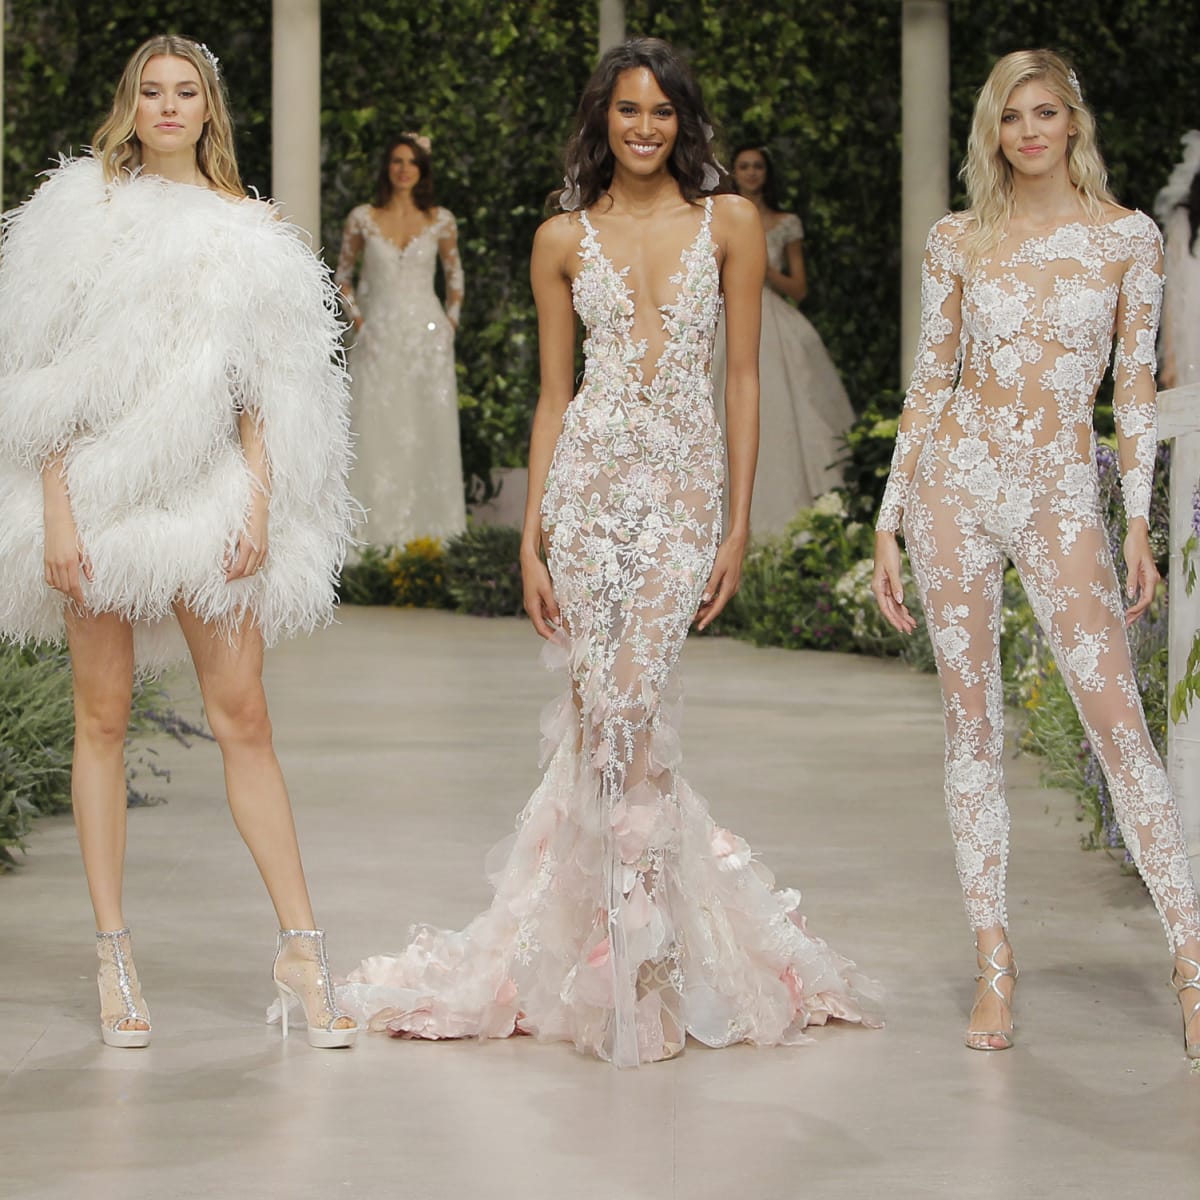 Spanish Heritage Bridal Brand Pronovias is Ready to Conquer the